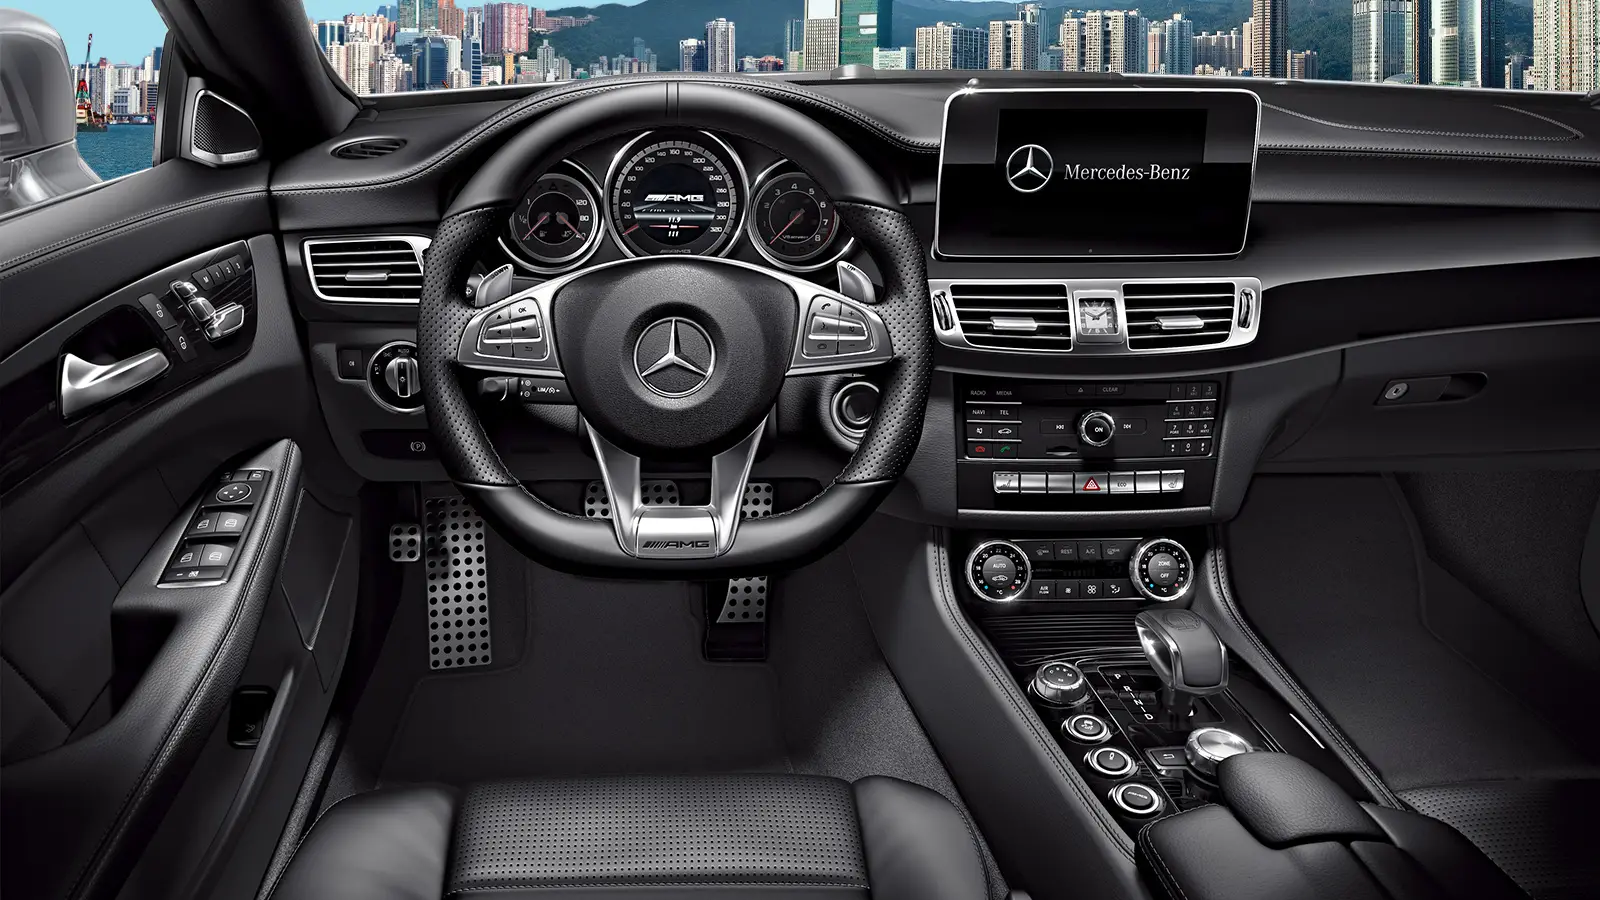 Mercedes Benz Amg Cls 63 S Interior Image Gallery Pictures